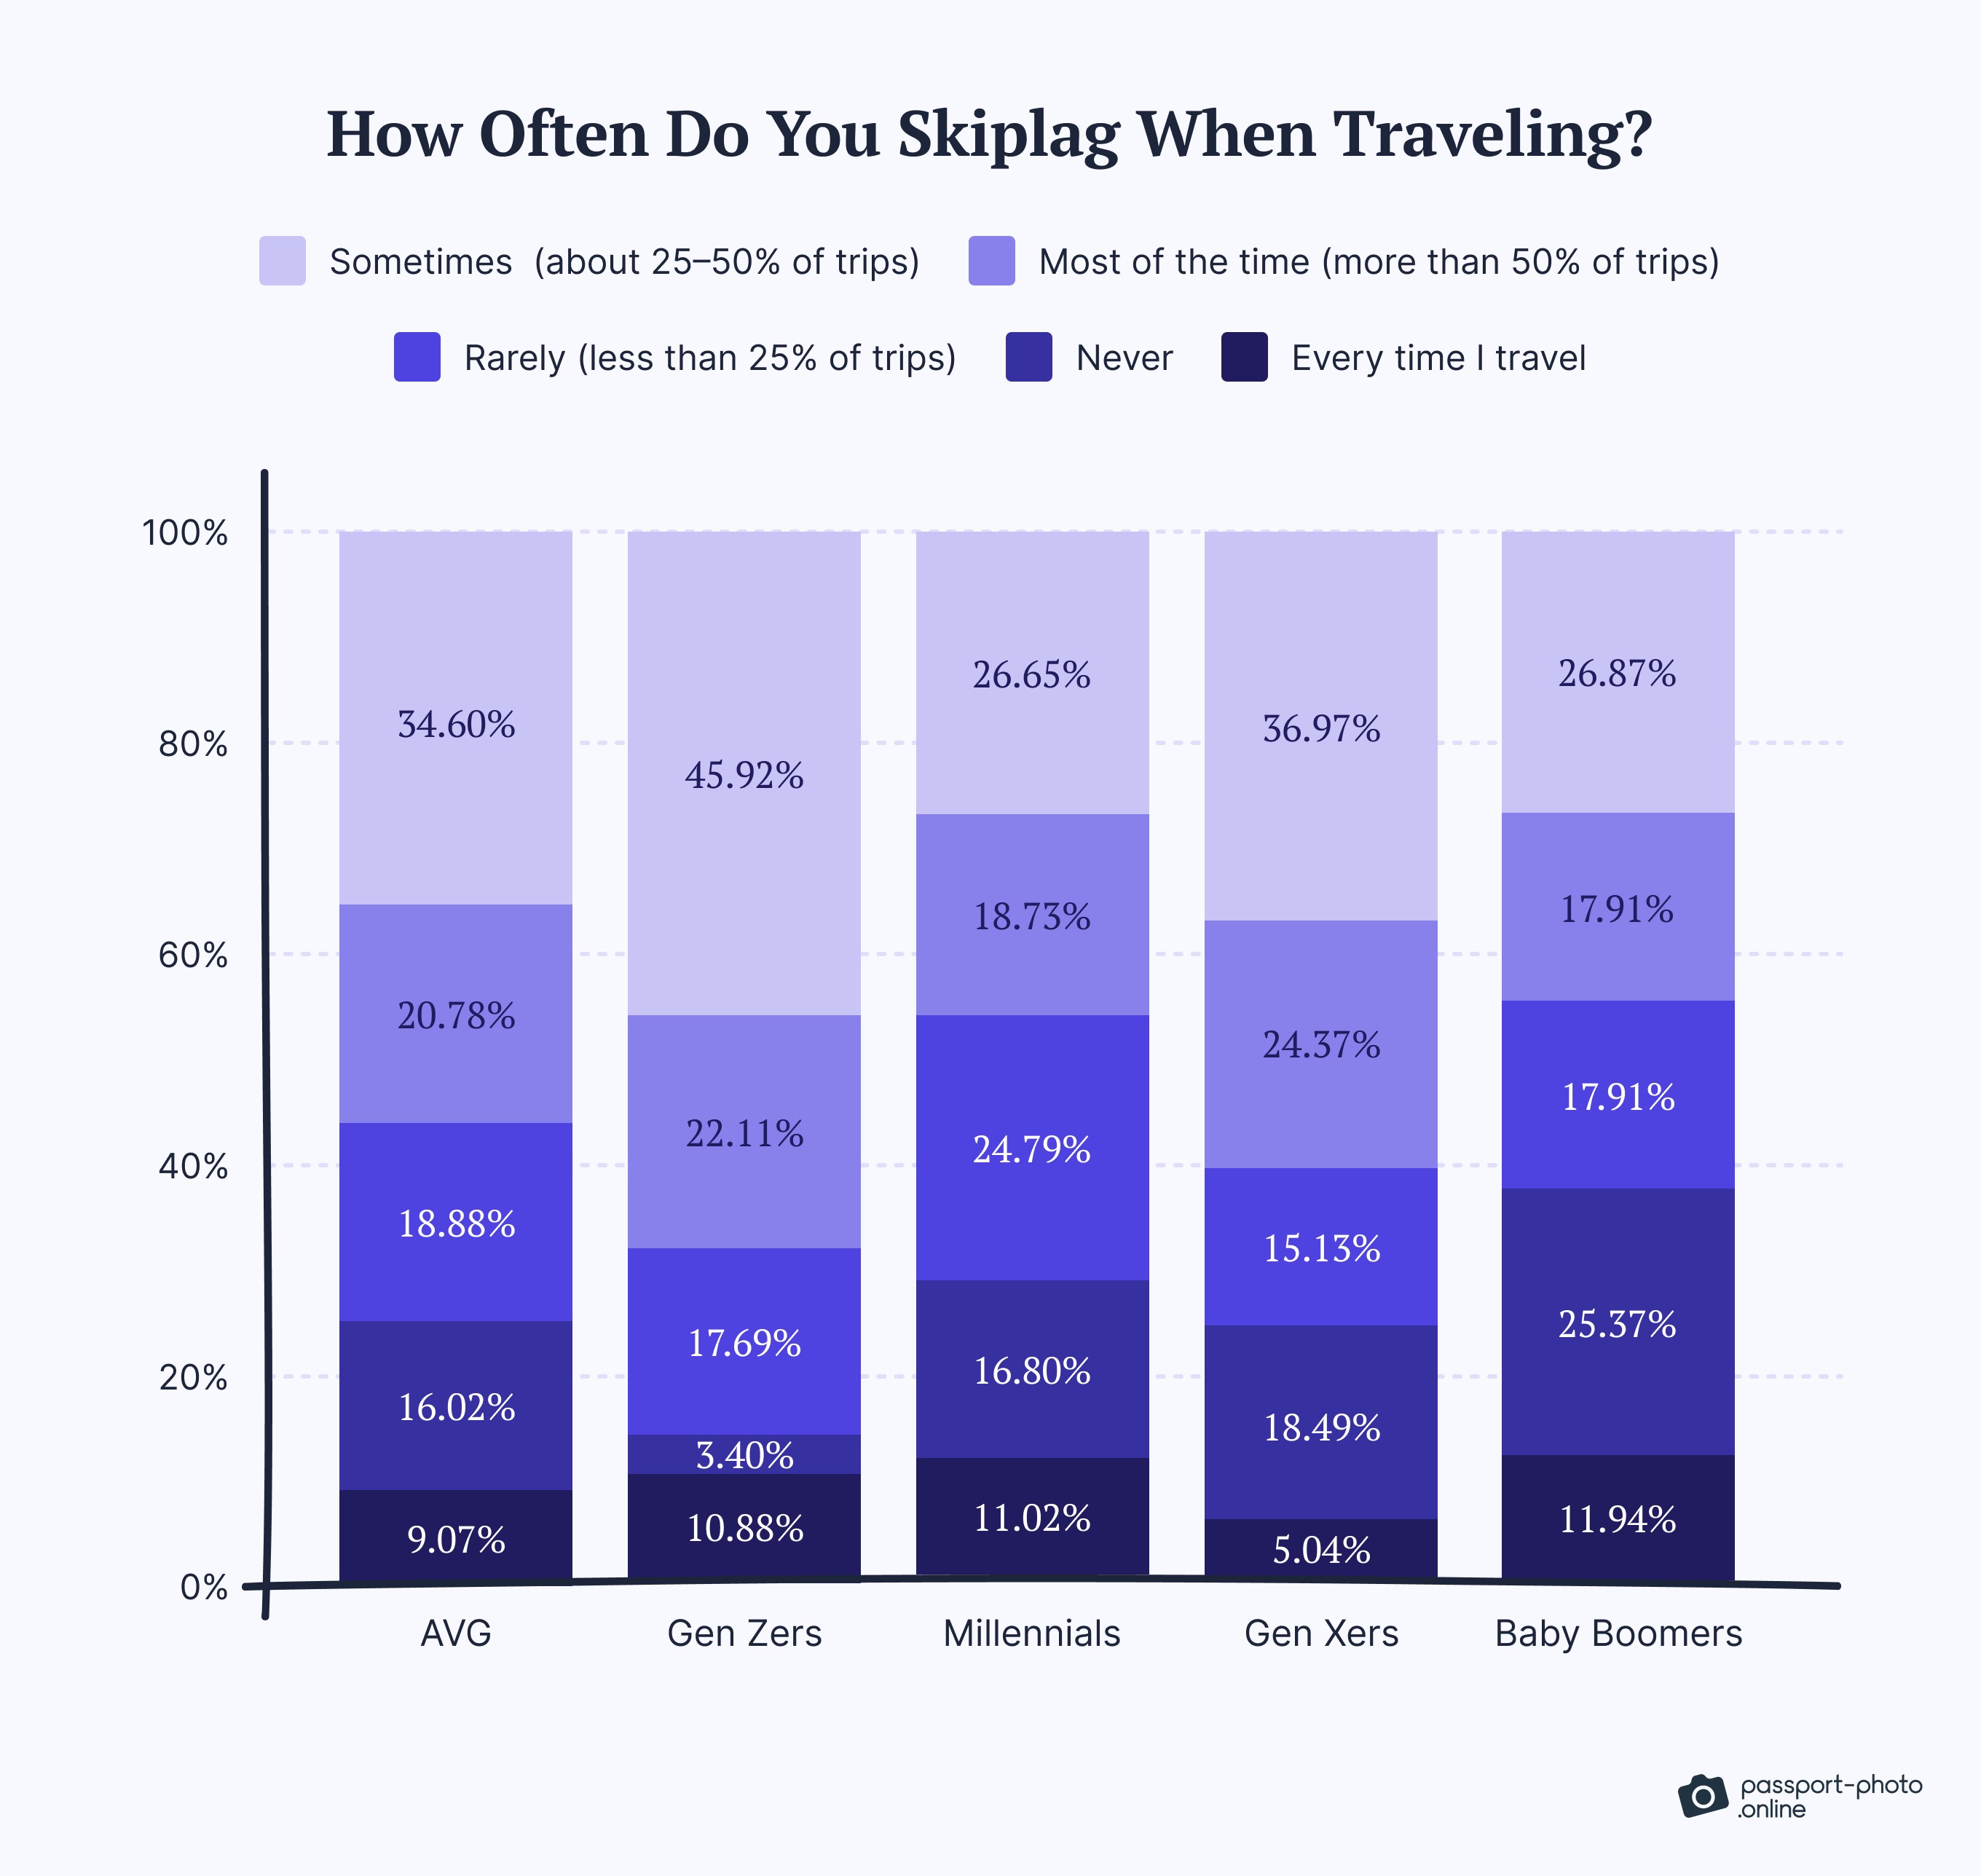 Frequency of engaging in skiplagging across generations, with most engaging in this tactic on about 25–50% of trips